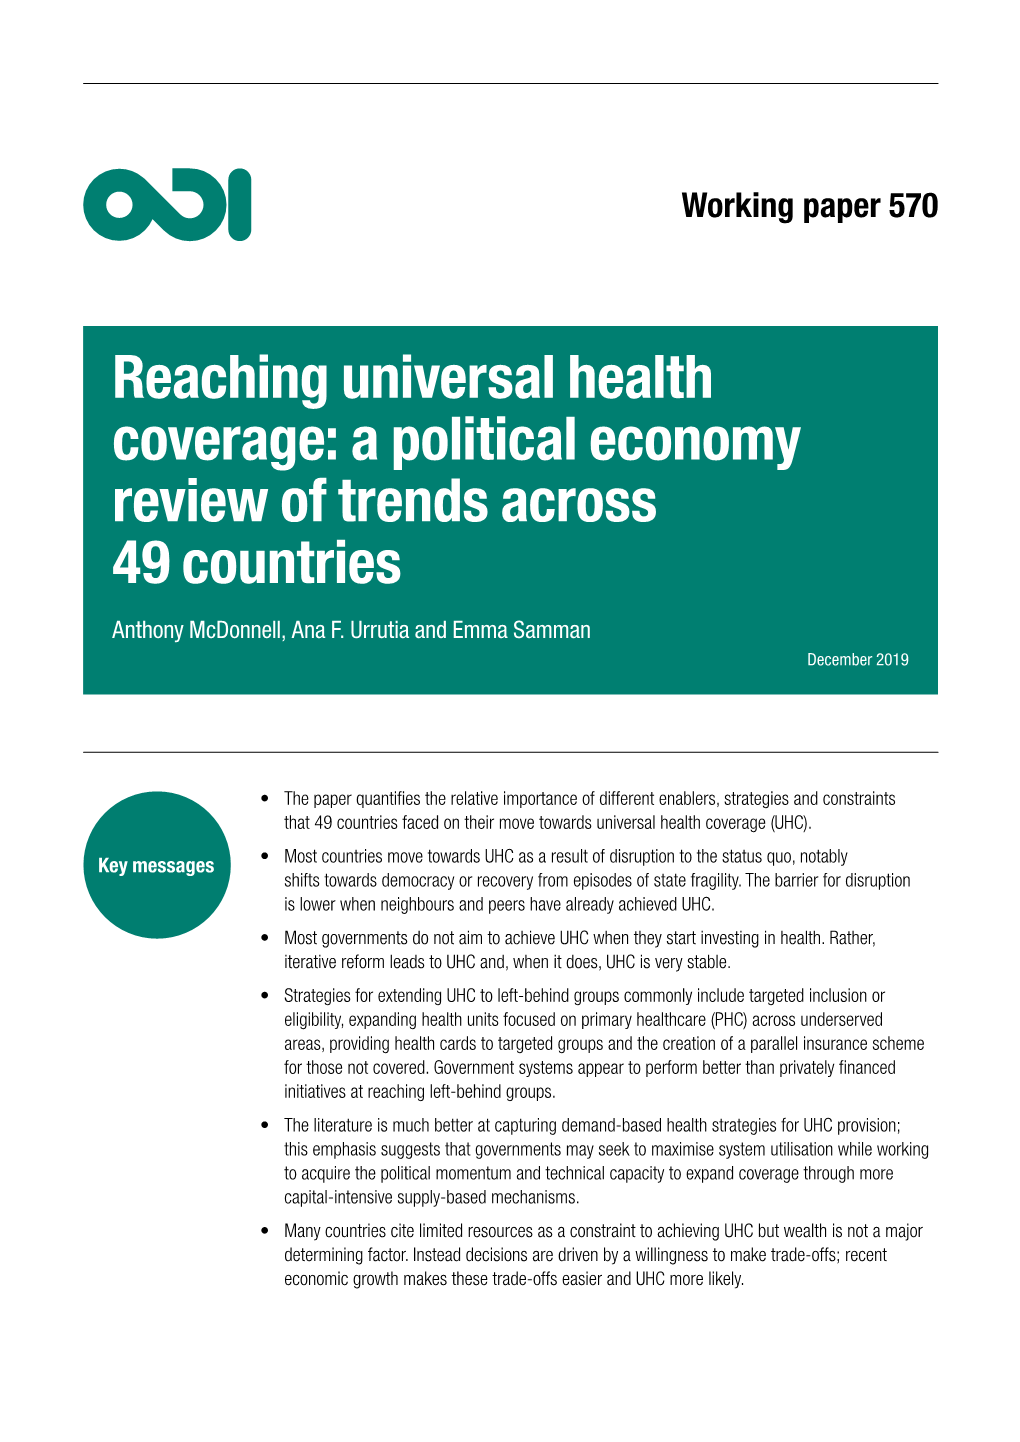 Reaching Universal Health Coverage: a Political Economy Review of Trends Across 49 Countries Anthony Mcdonnell, Ana F